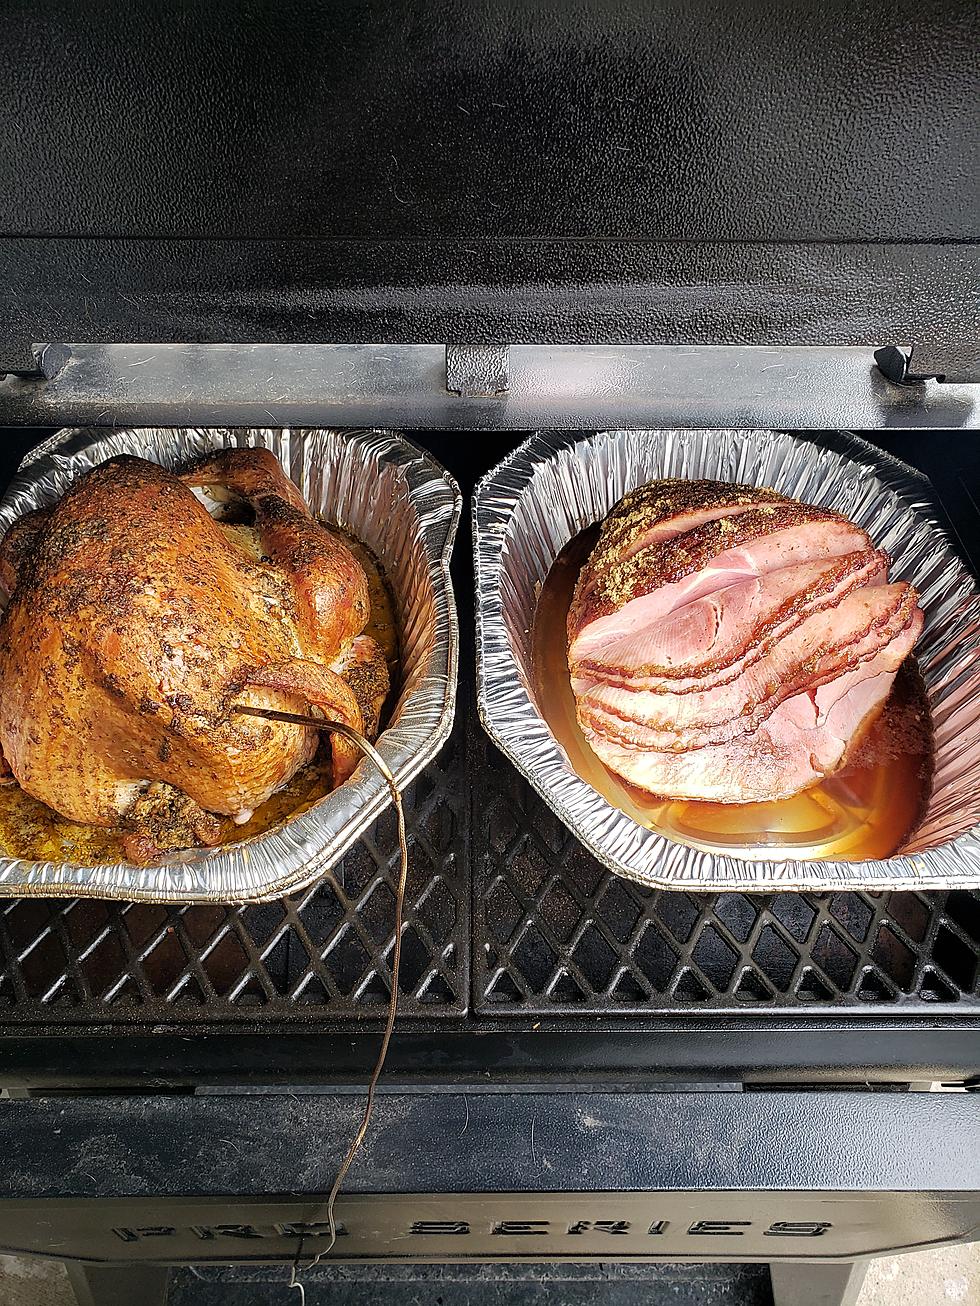 Bozeman Thanksgiving: I’m Thankful For My Pellet Grill This Year